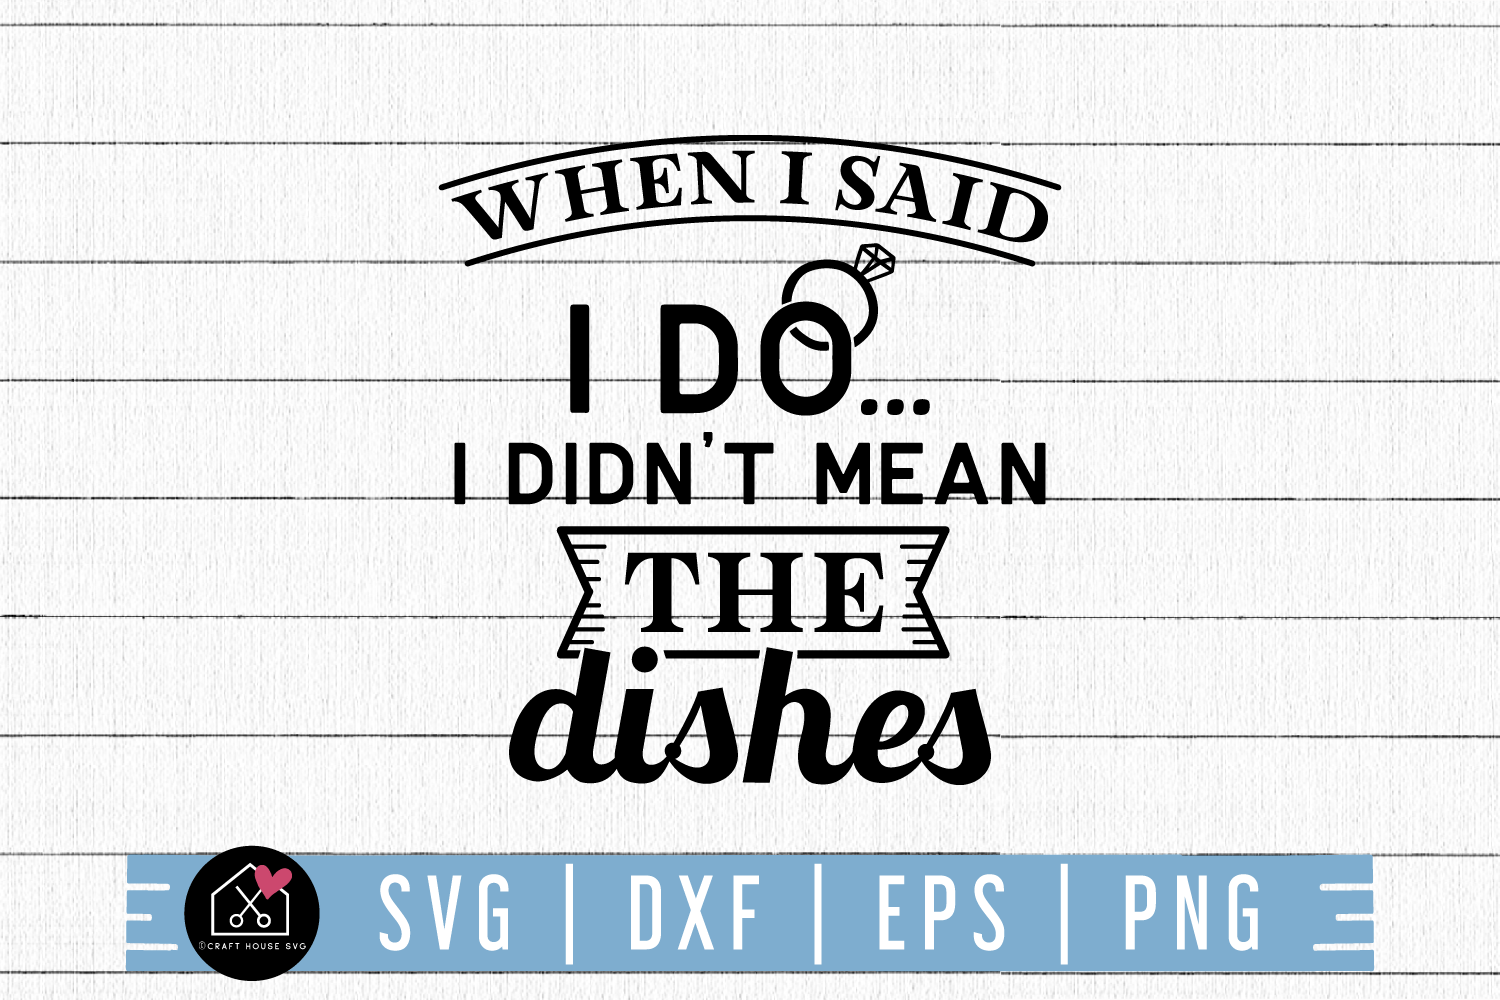 Kitchen SVG file | When I said I do SVG Craft House SVG - SVG files for Cricut and Silhouette